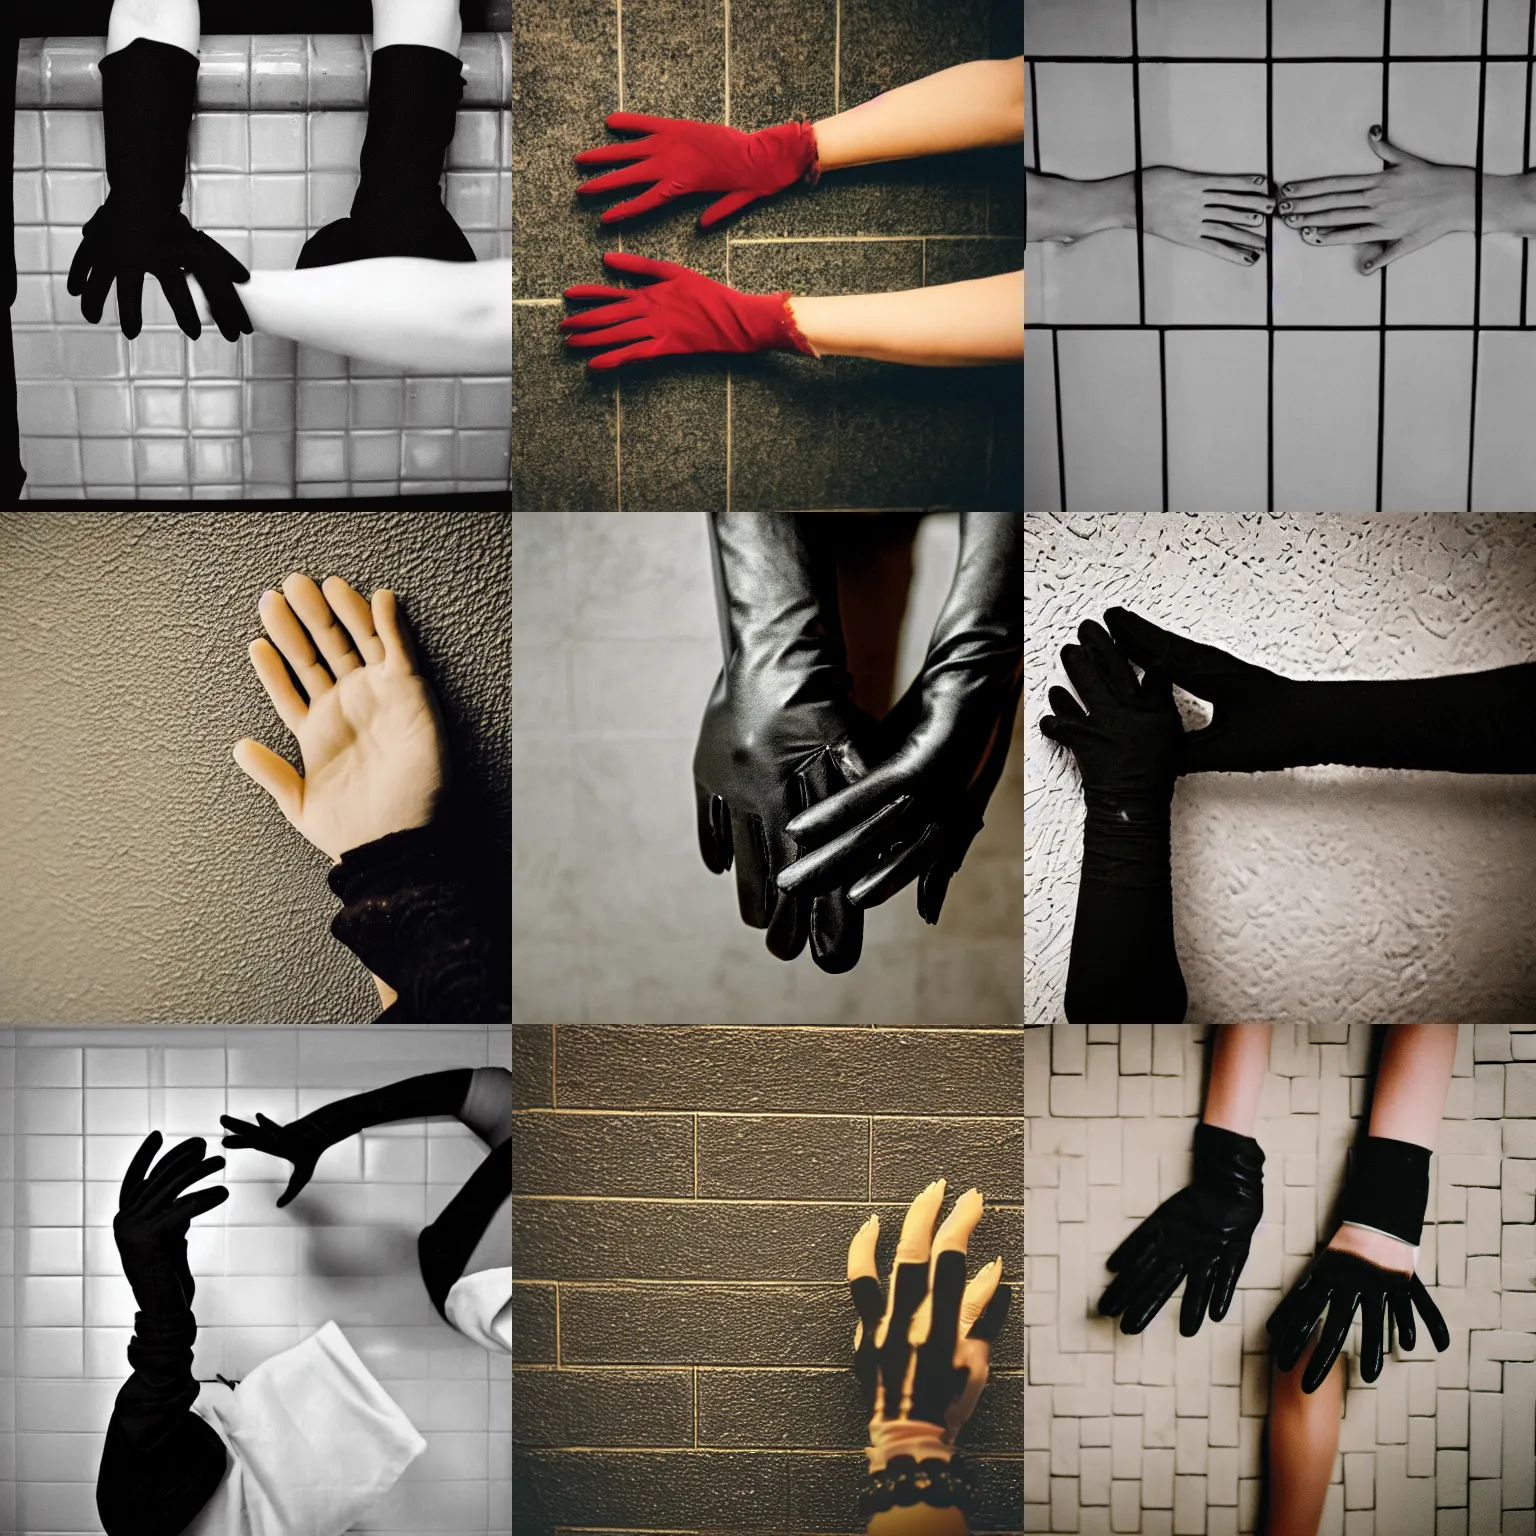 Prompt: a vintage photo of the hands of a woman wearing black gloves leaning on a bathroom wall tiles, close up, fujifilm, 3 5 mm